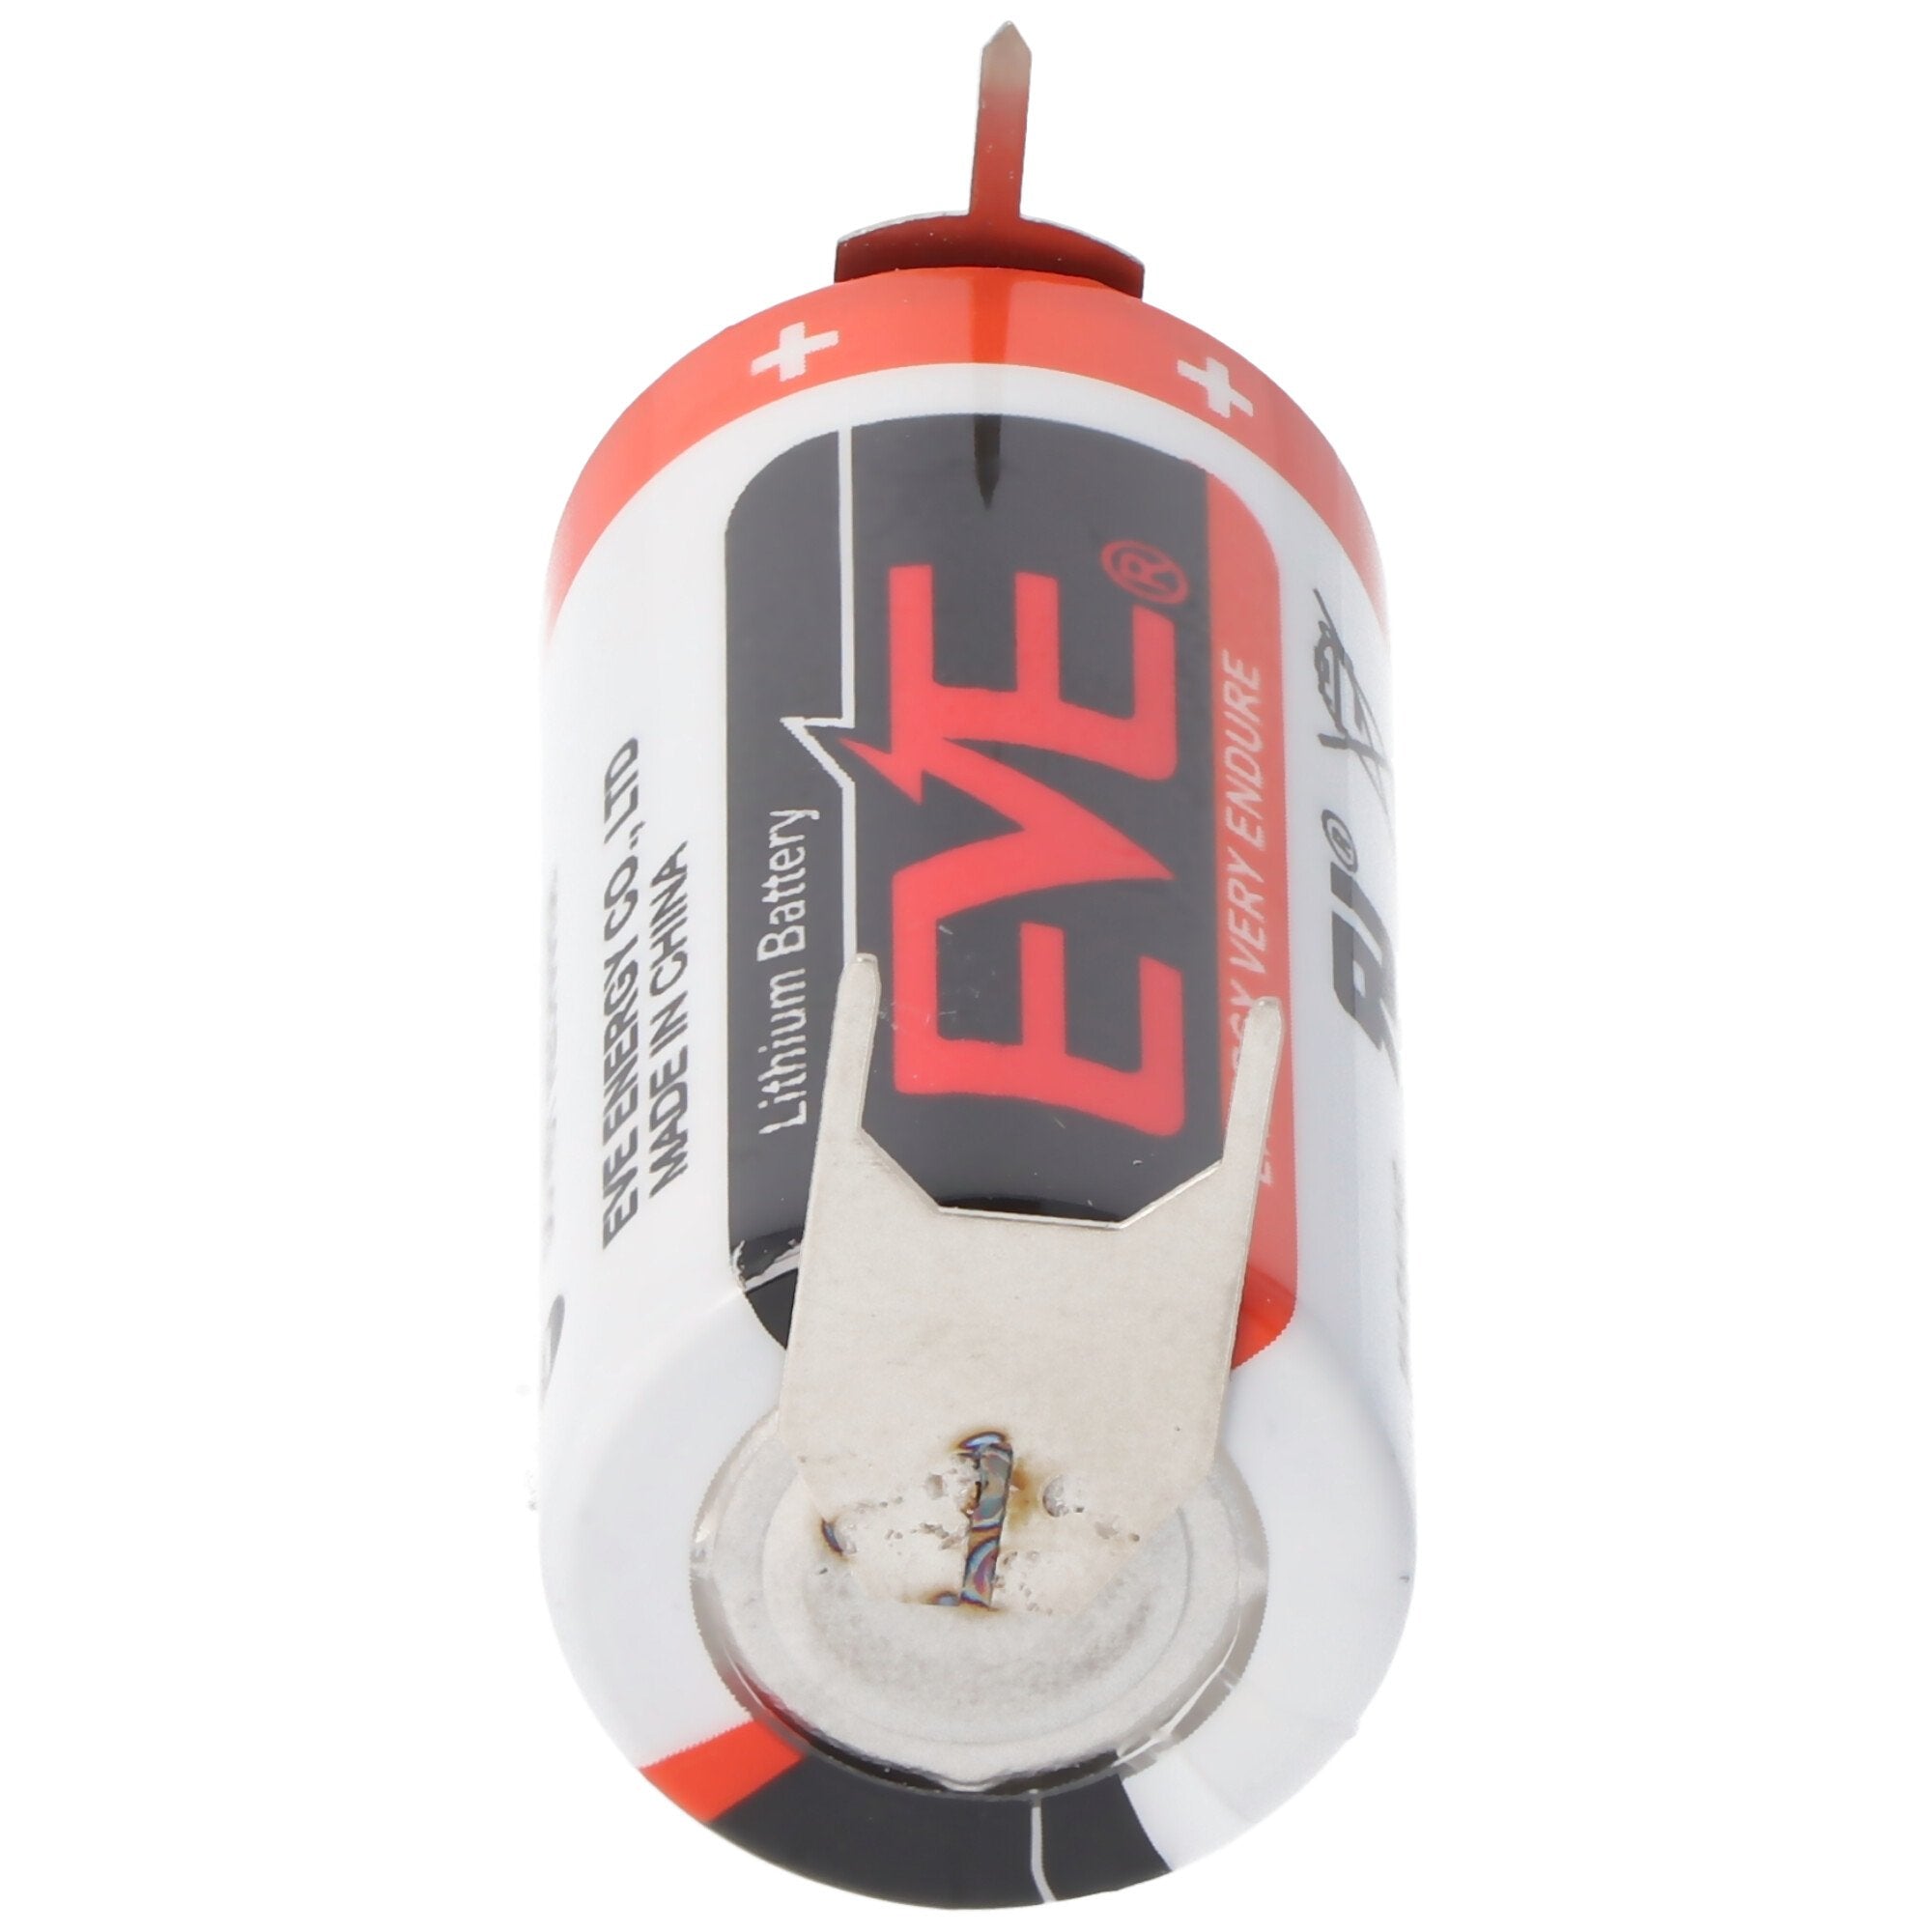 EVE CR17335 battery size 2 / 3A with 3 volt voltage and 1550mAh capacity, dimensions 33.5 x 17mm, wi